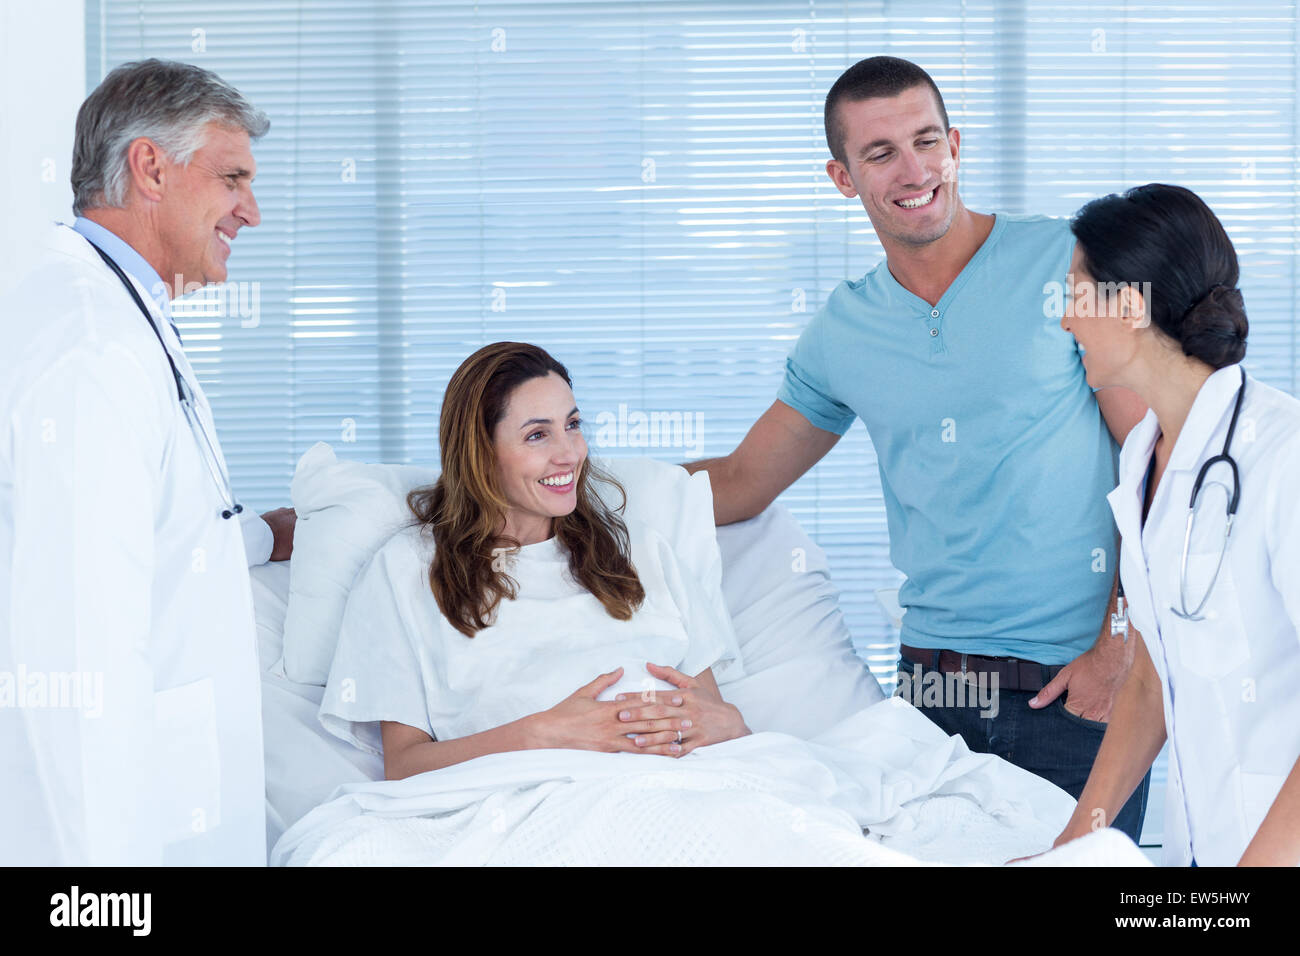 Future parents talking with smiling doctors Stock Photo